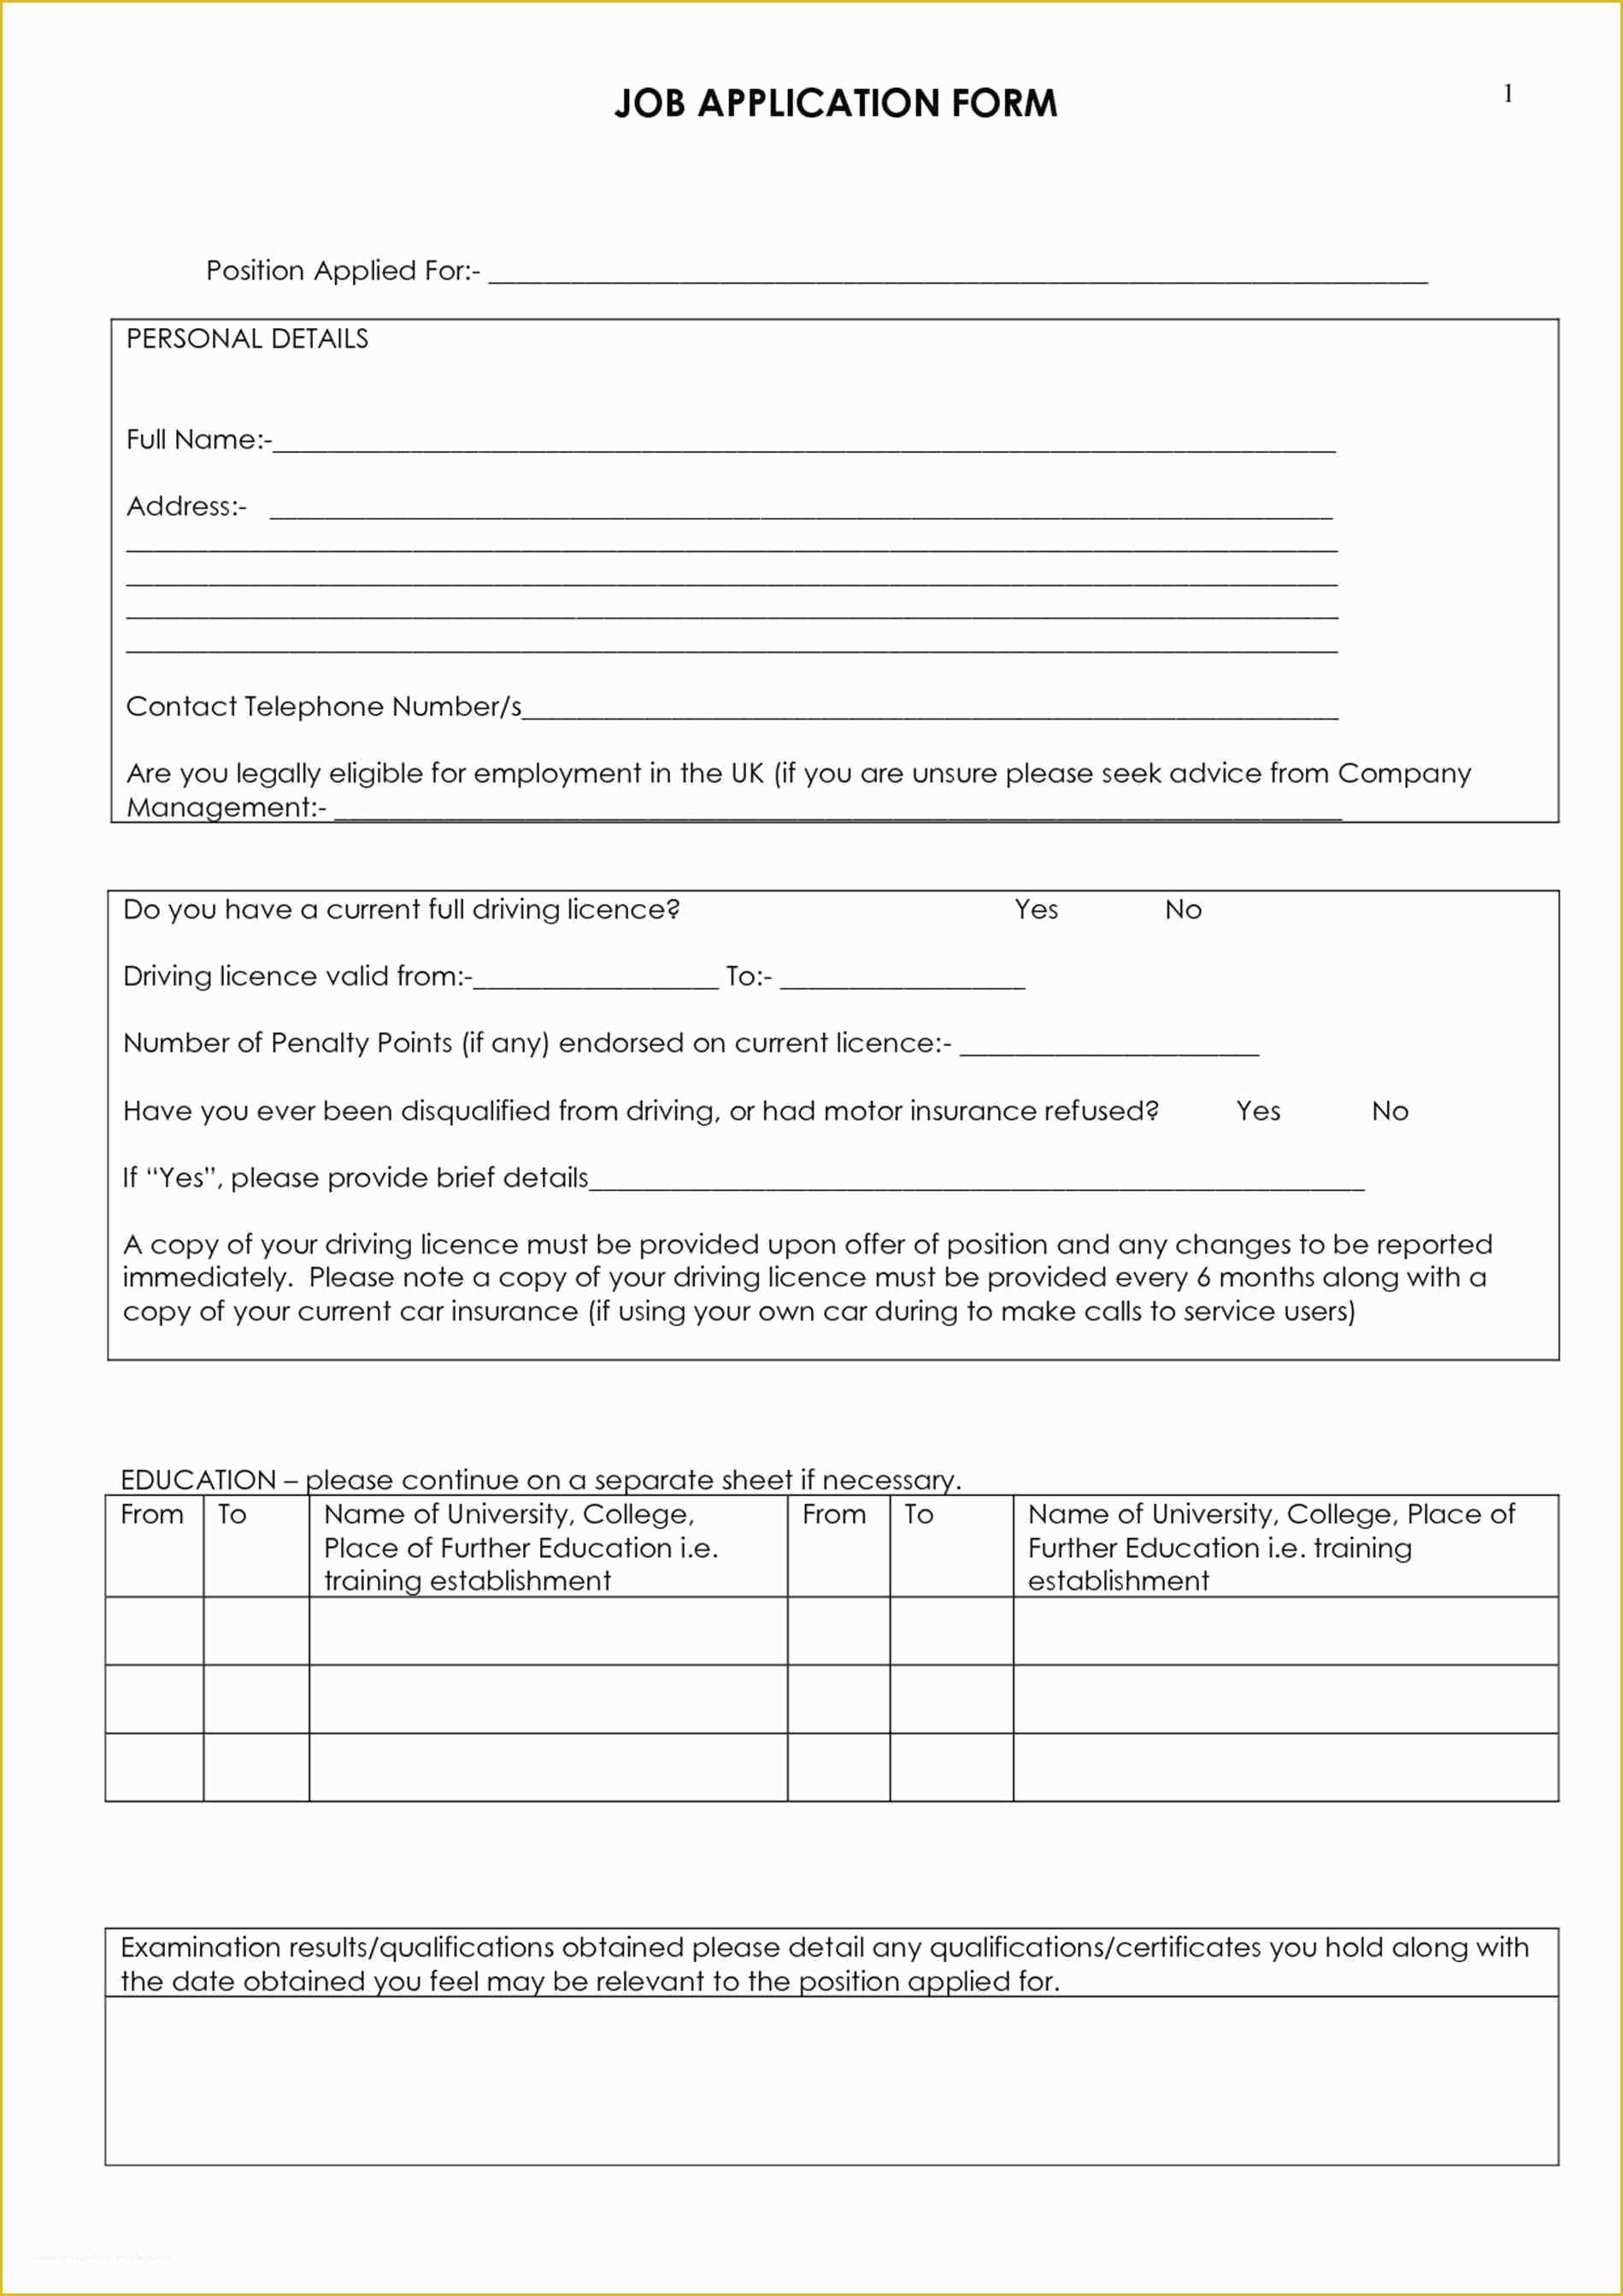 Free Application form Template Of Free Employment Job Application form Template Sample